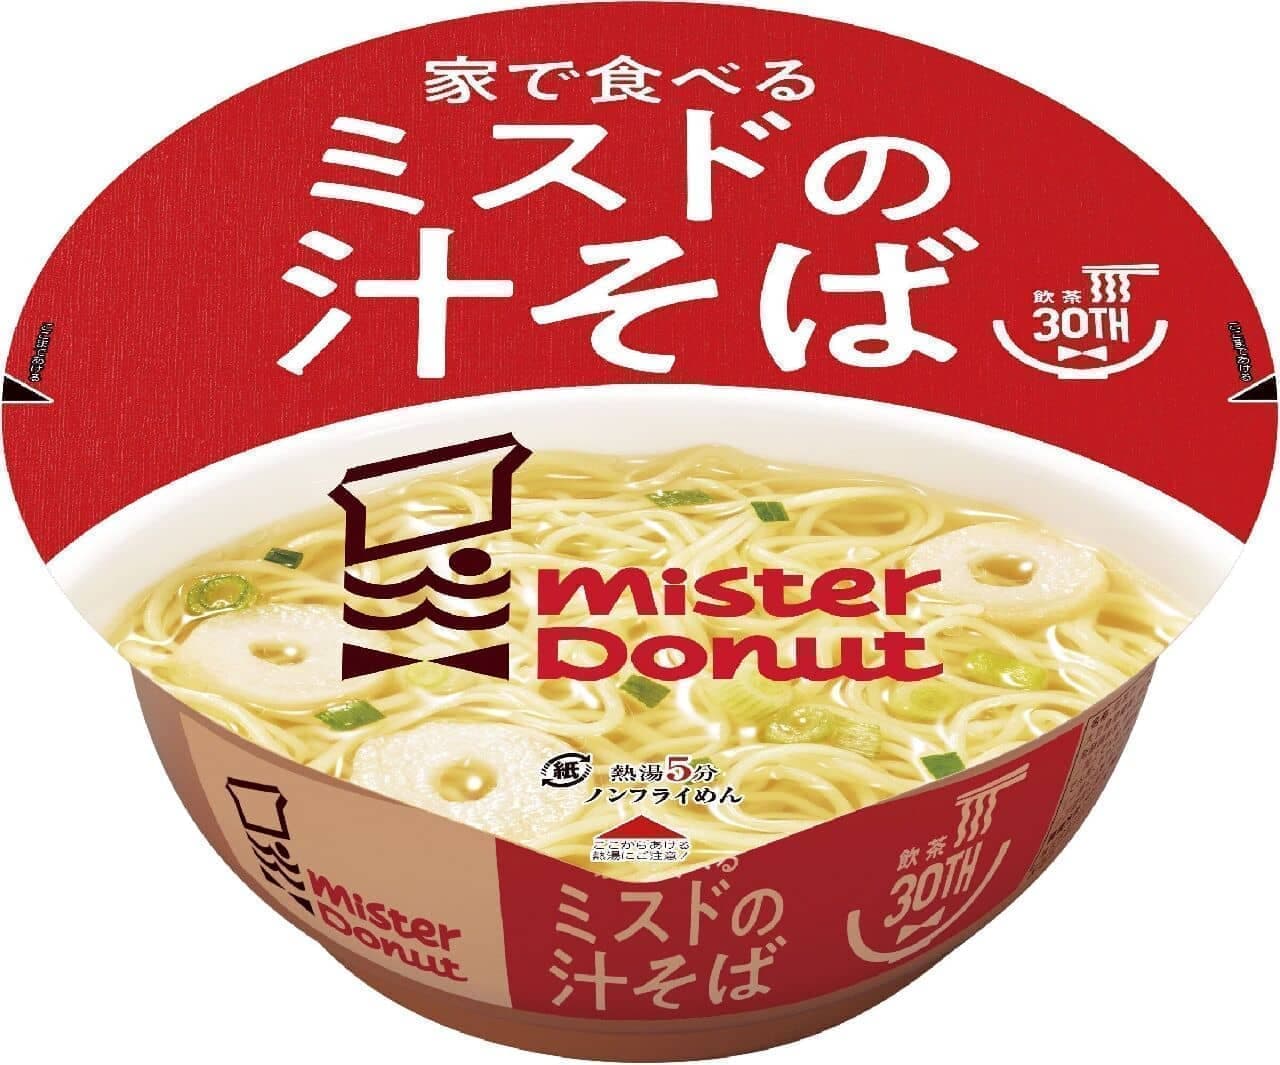 Mr. Donut "Miss Donut's Soup Soba at Home".